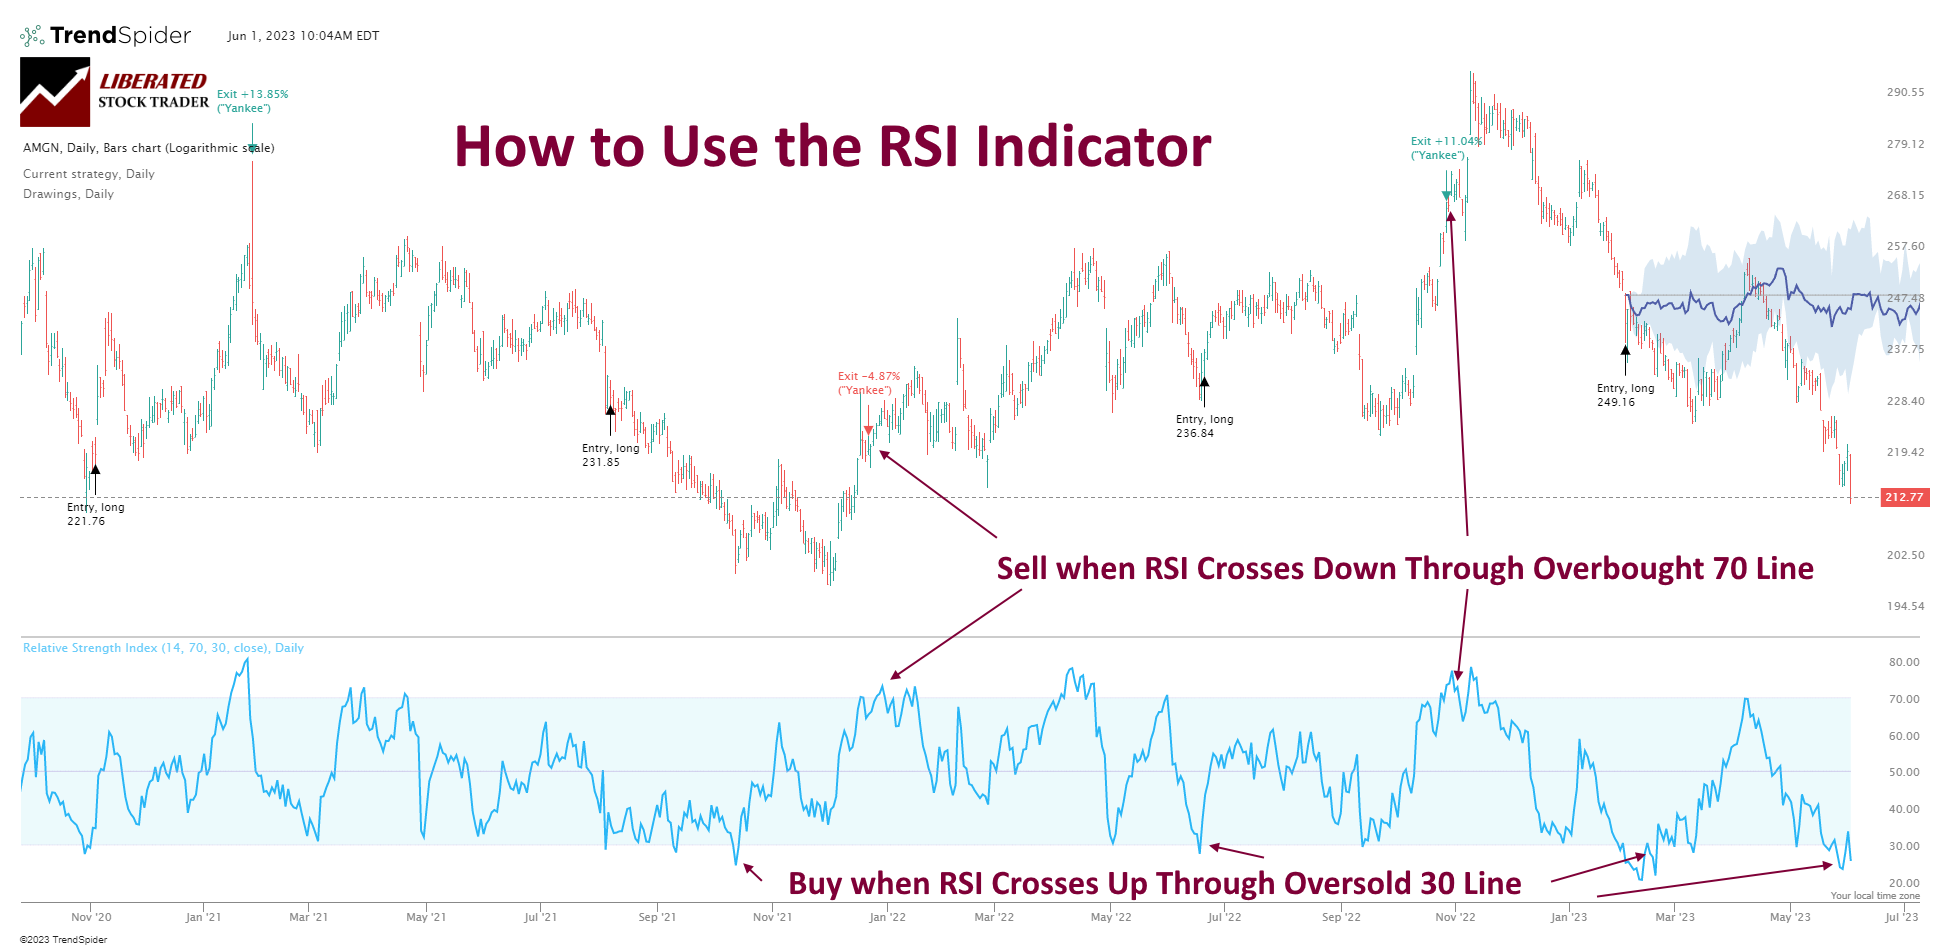 How to use the RSI indicators to trade and make buy and sell decisions.